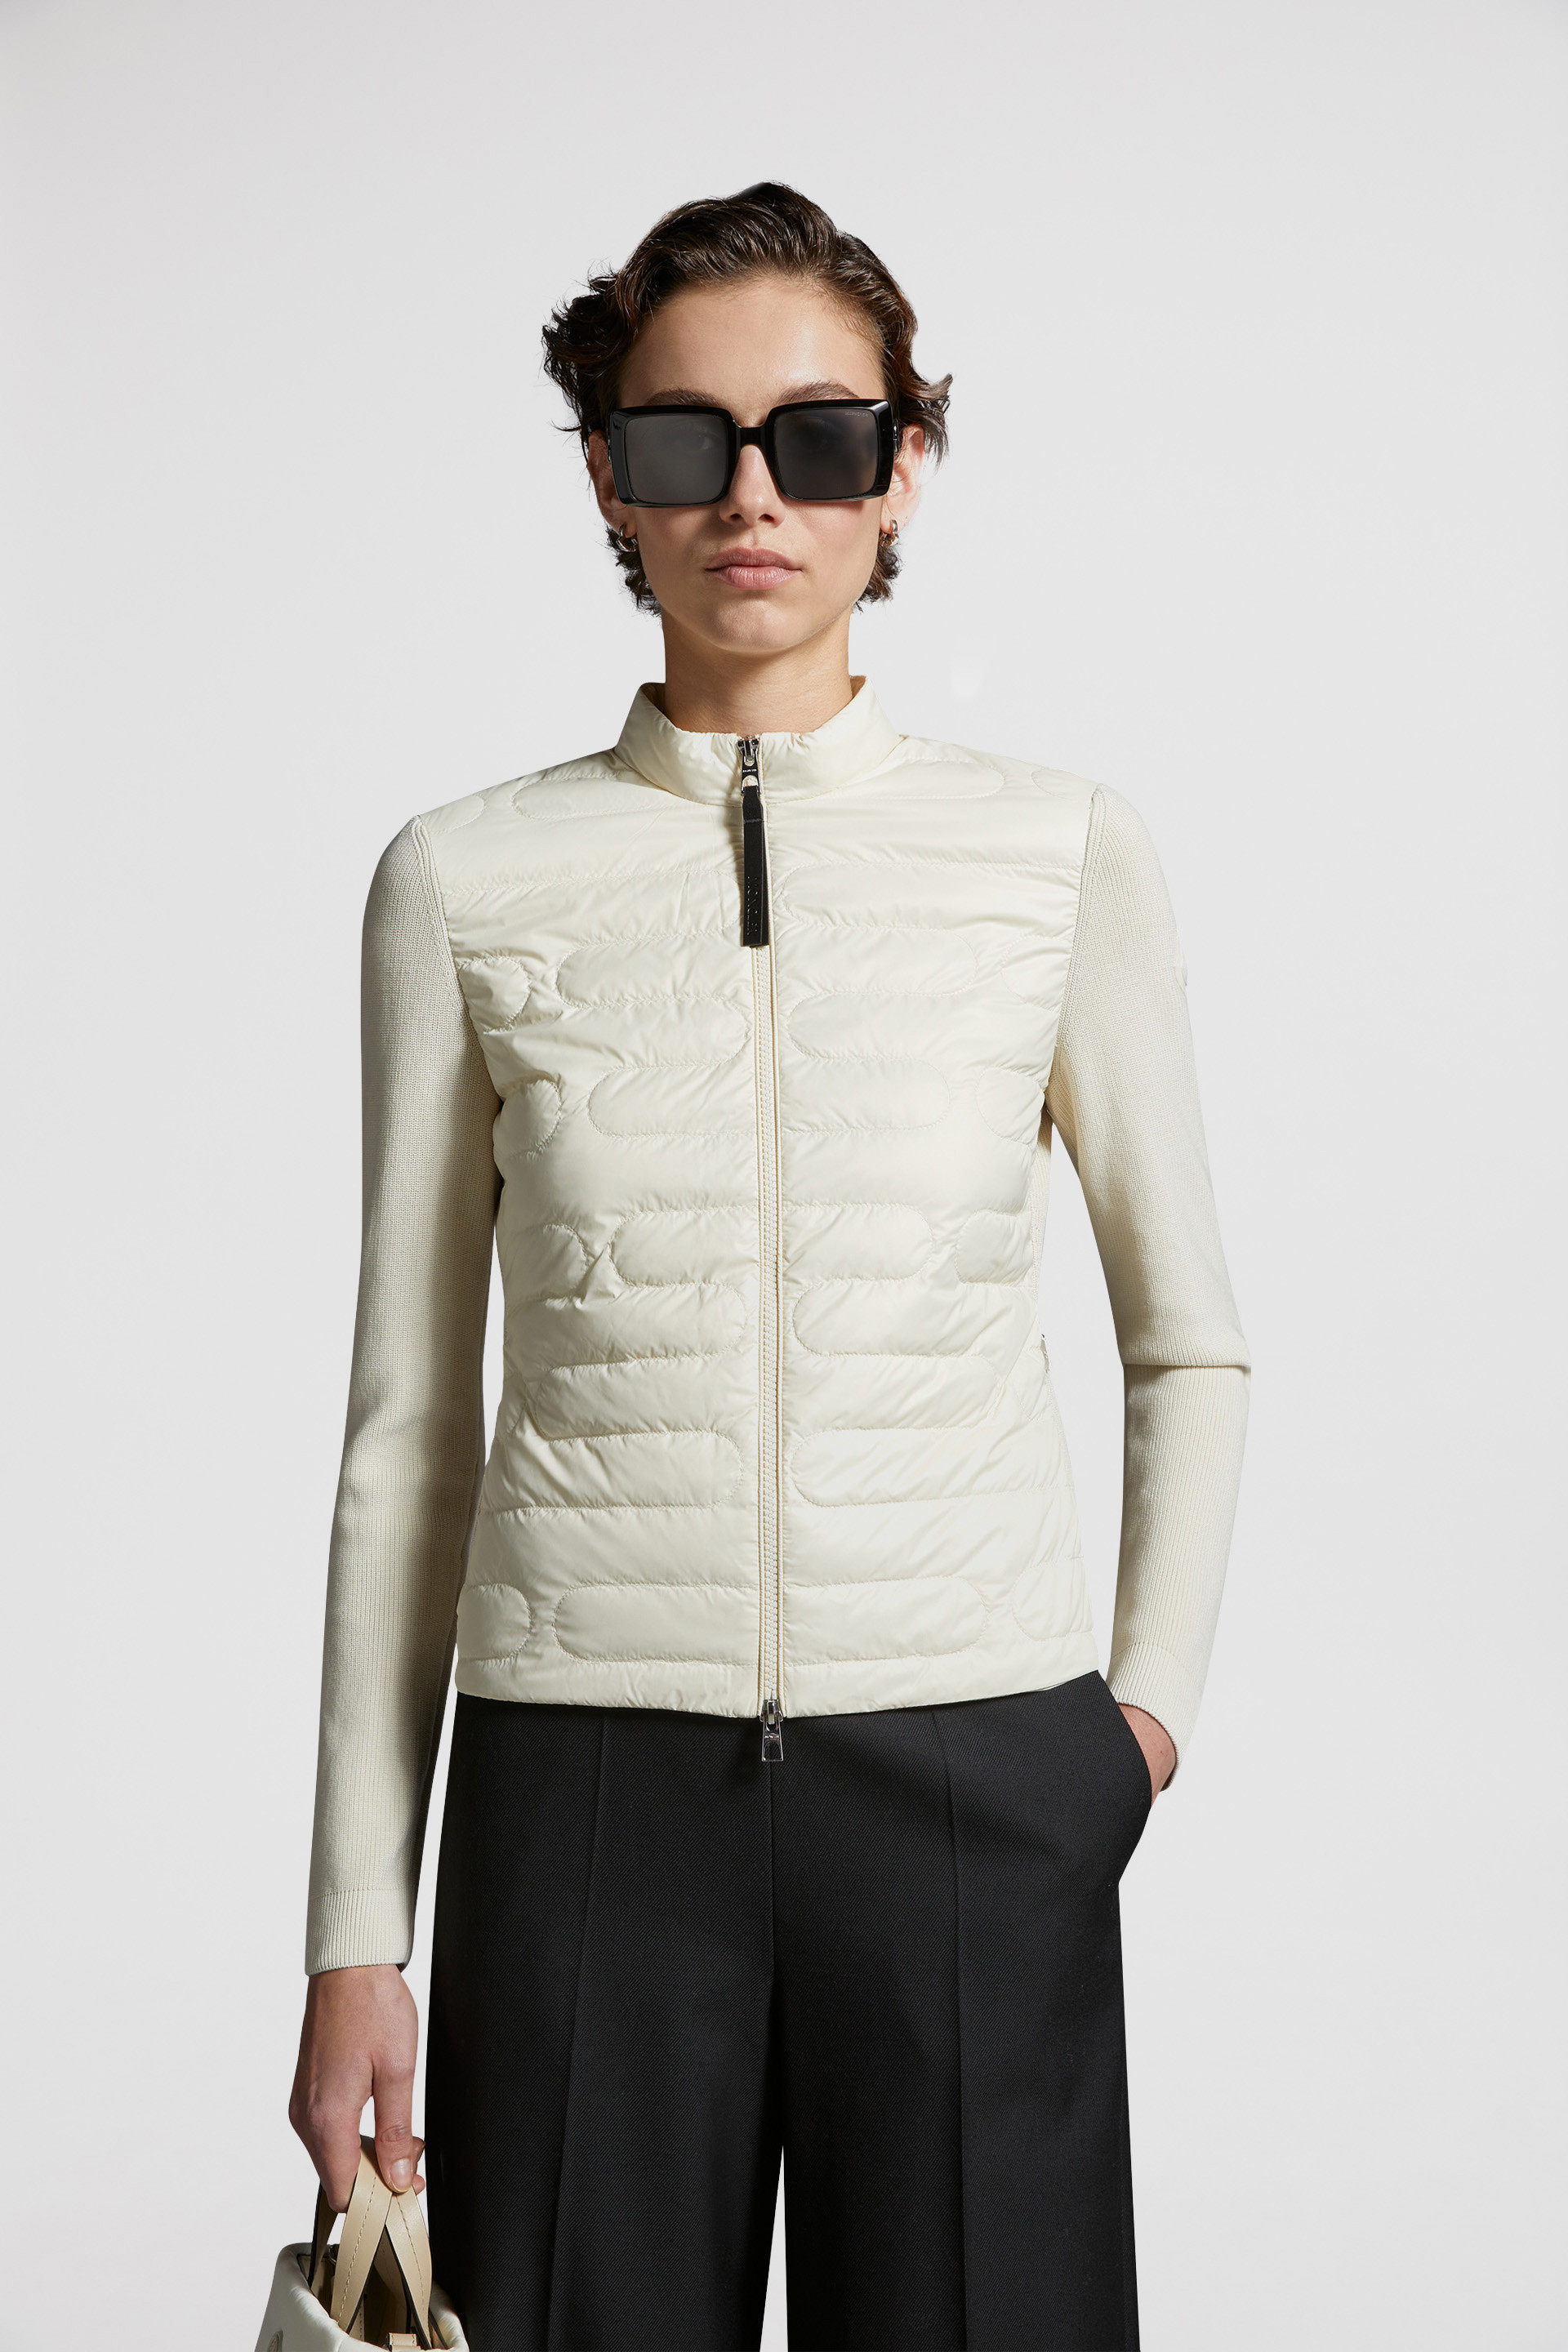 Moncler Women - Outerwear, Clothing & Accessories